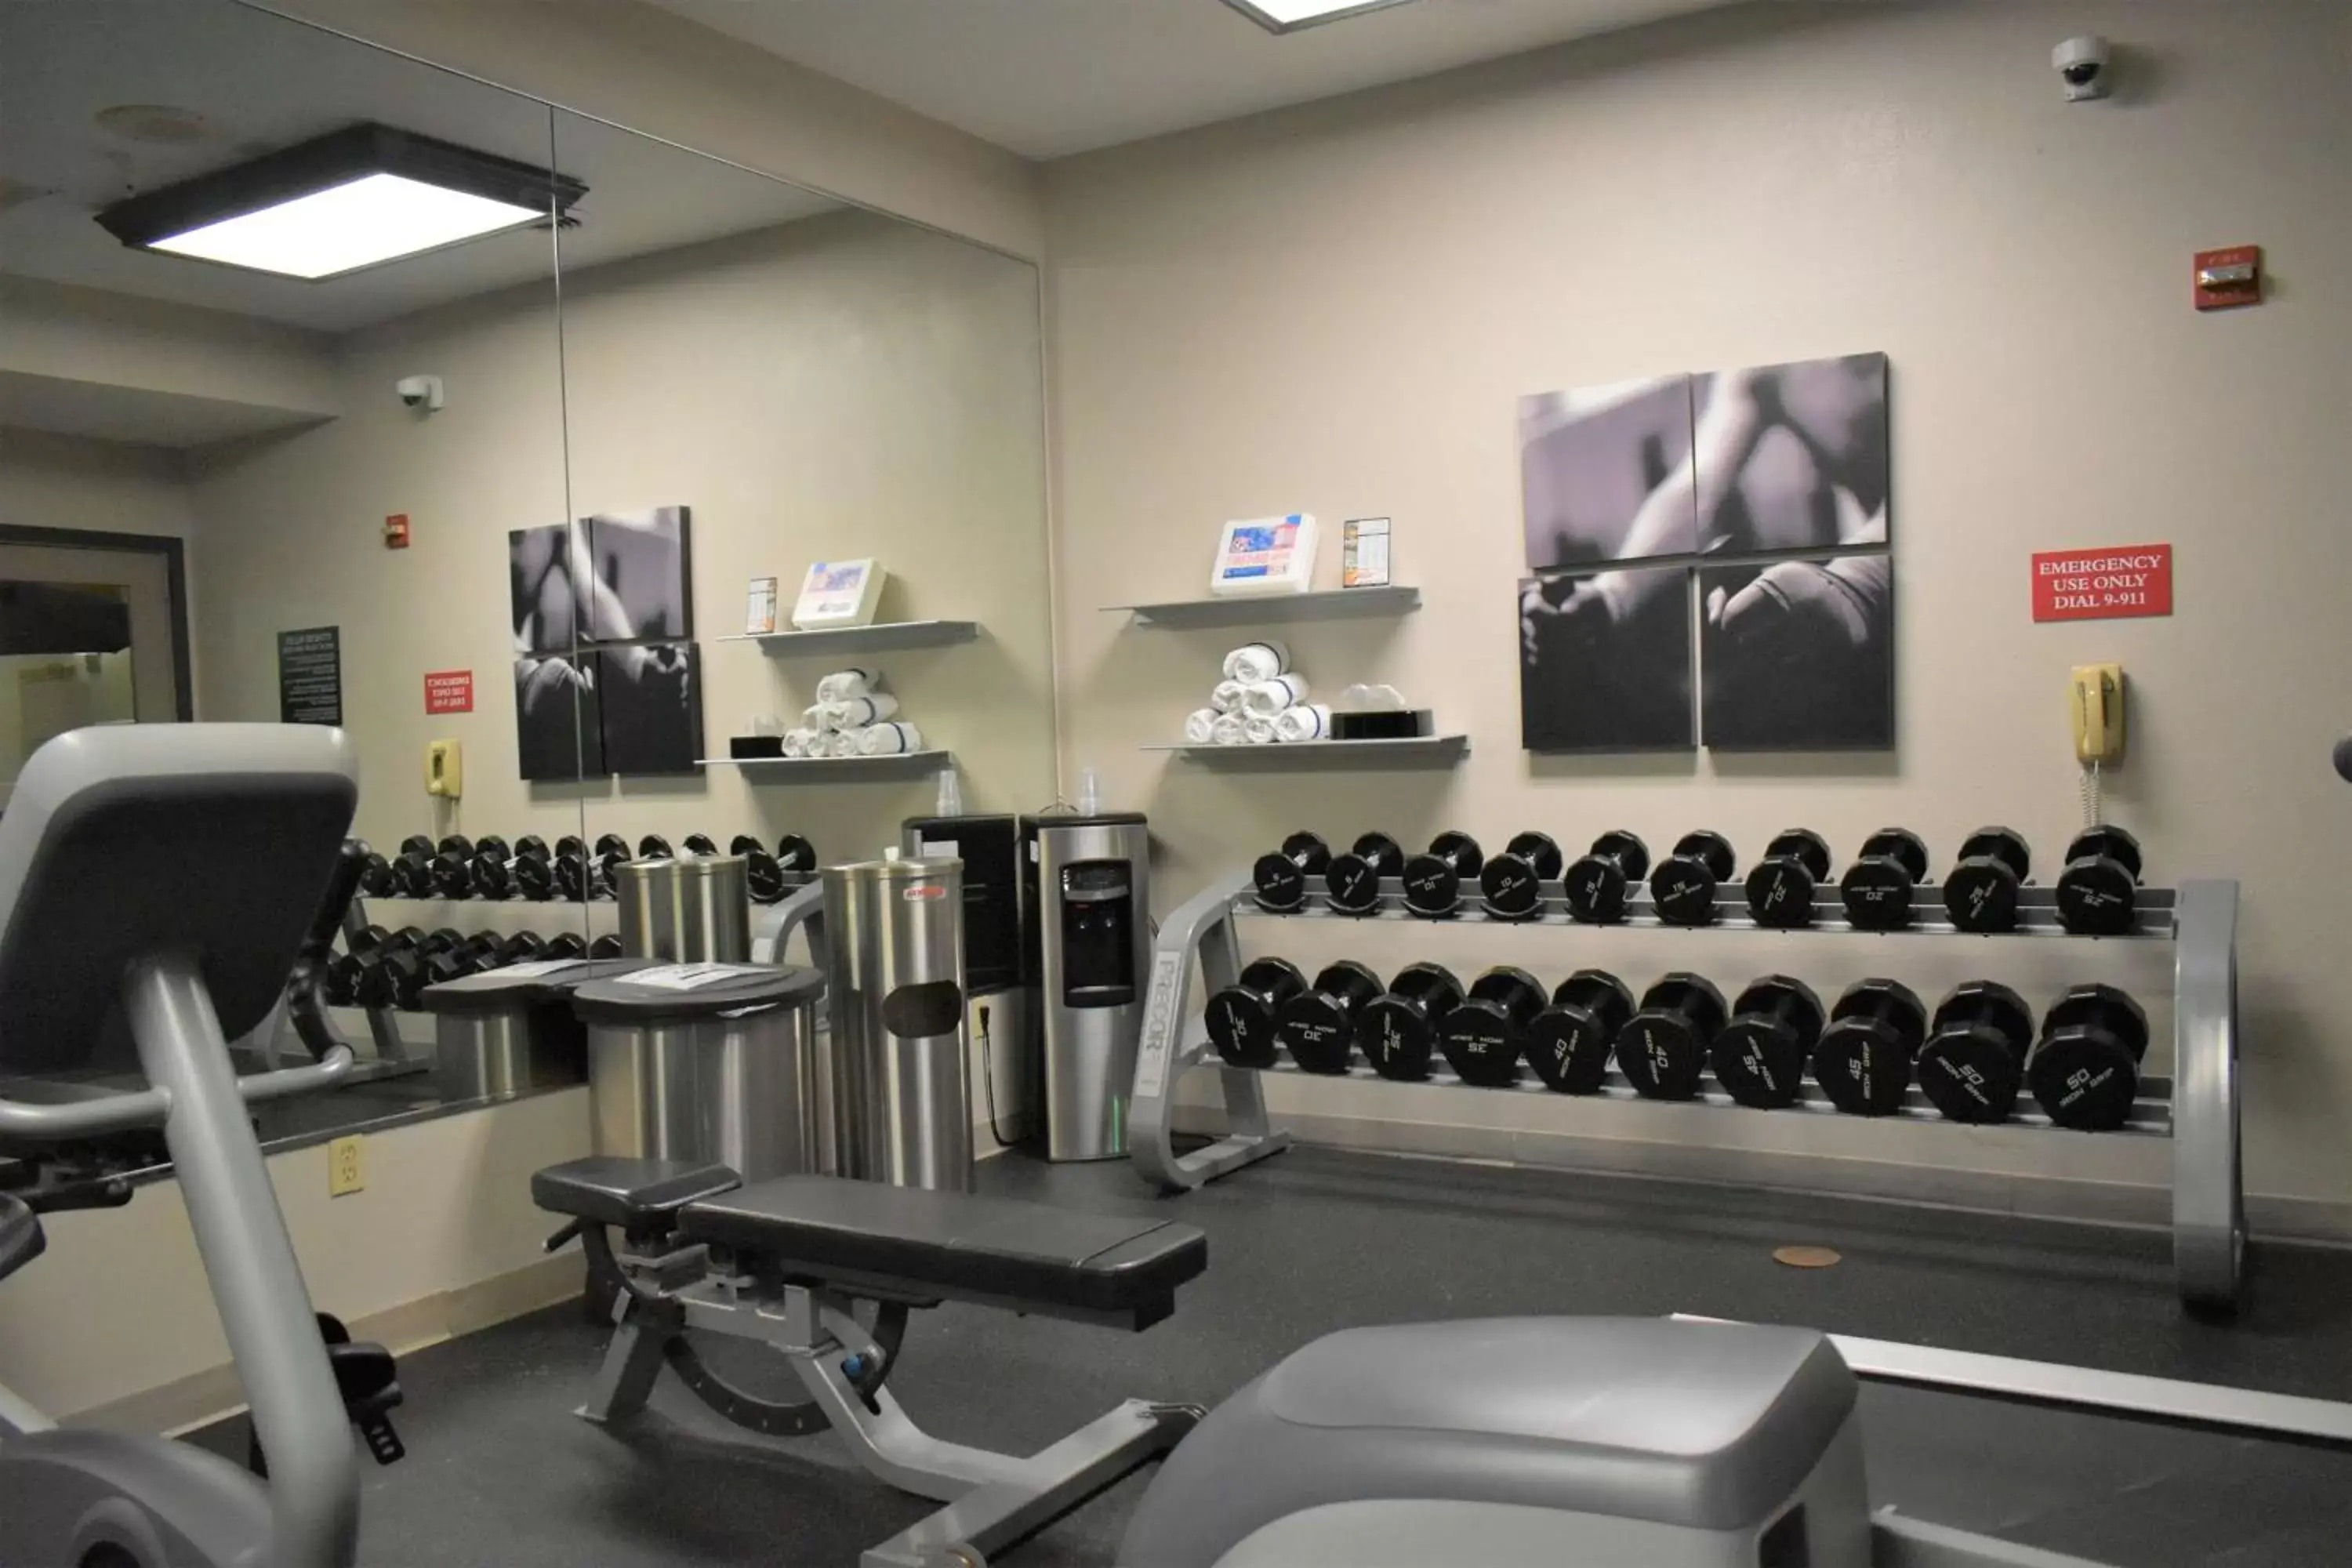 Activities, Fitness Center/Facilities in Country Inn & Suites by Radisson, Kenosha, WI